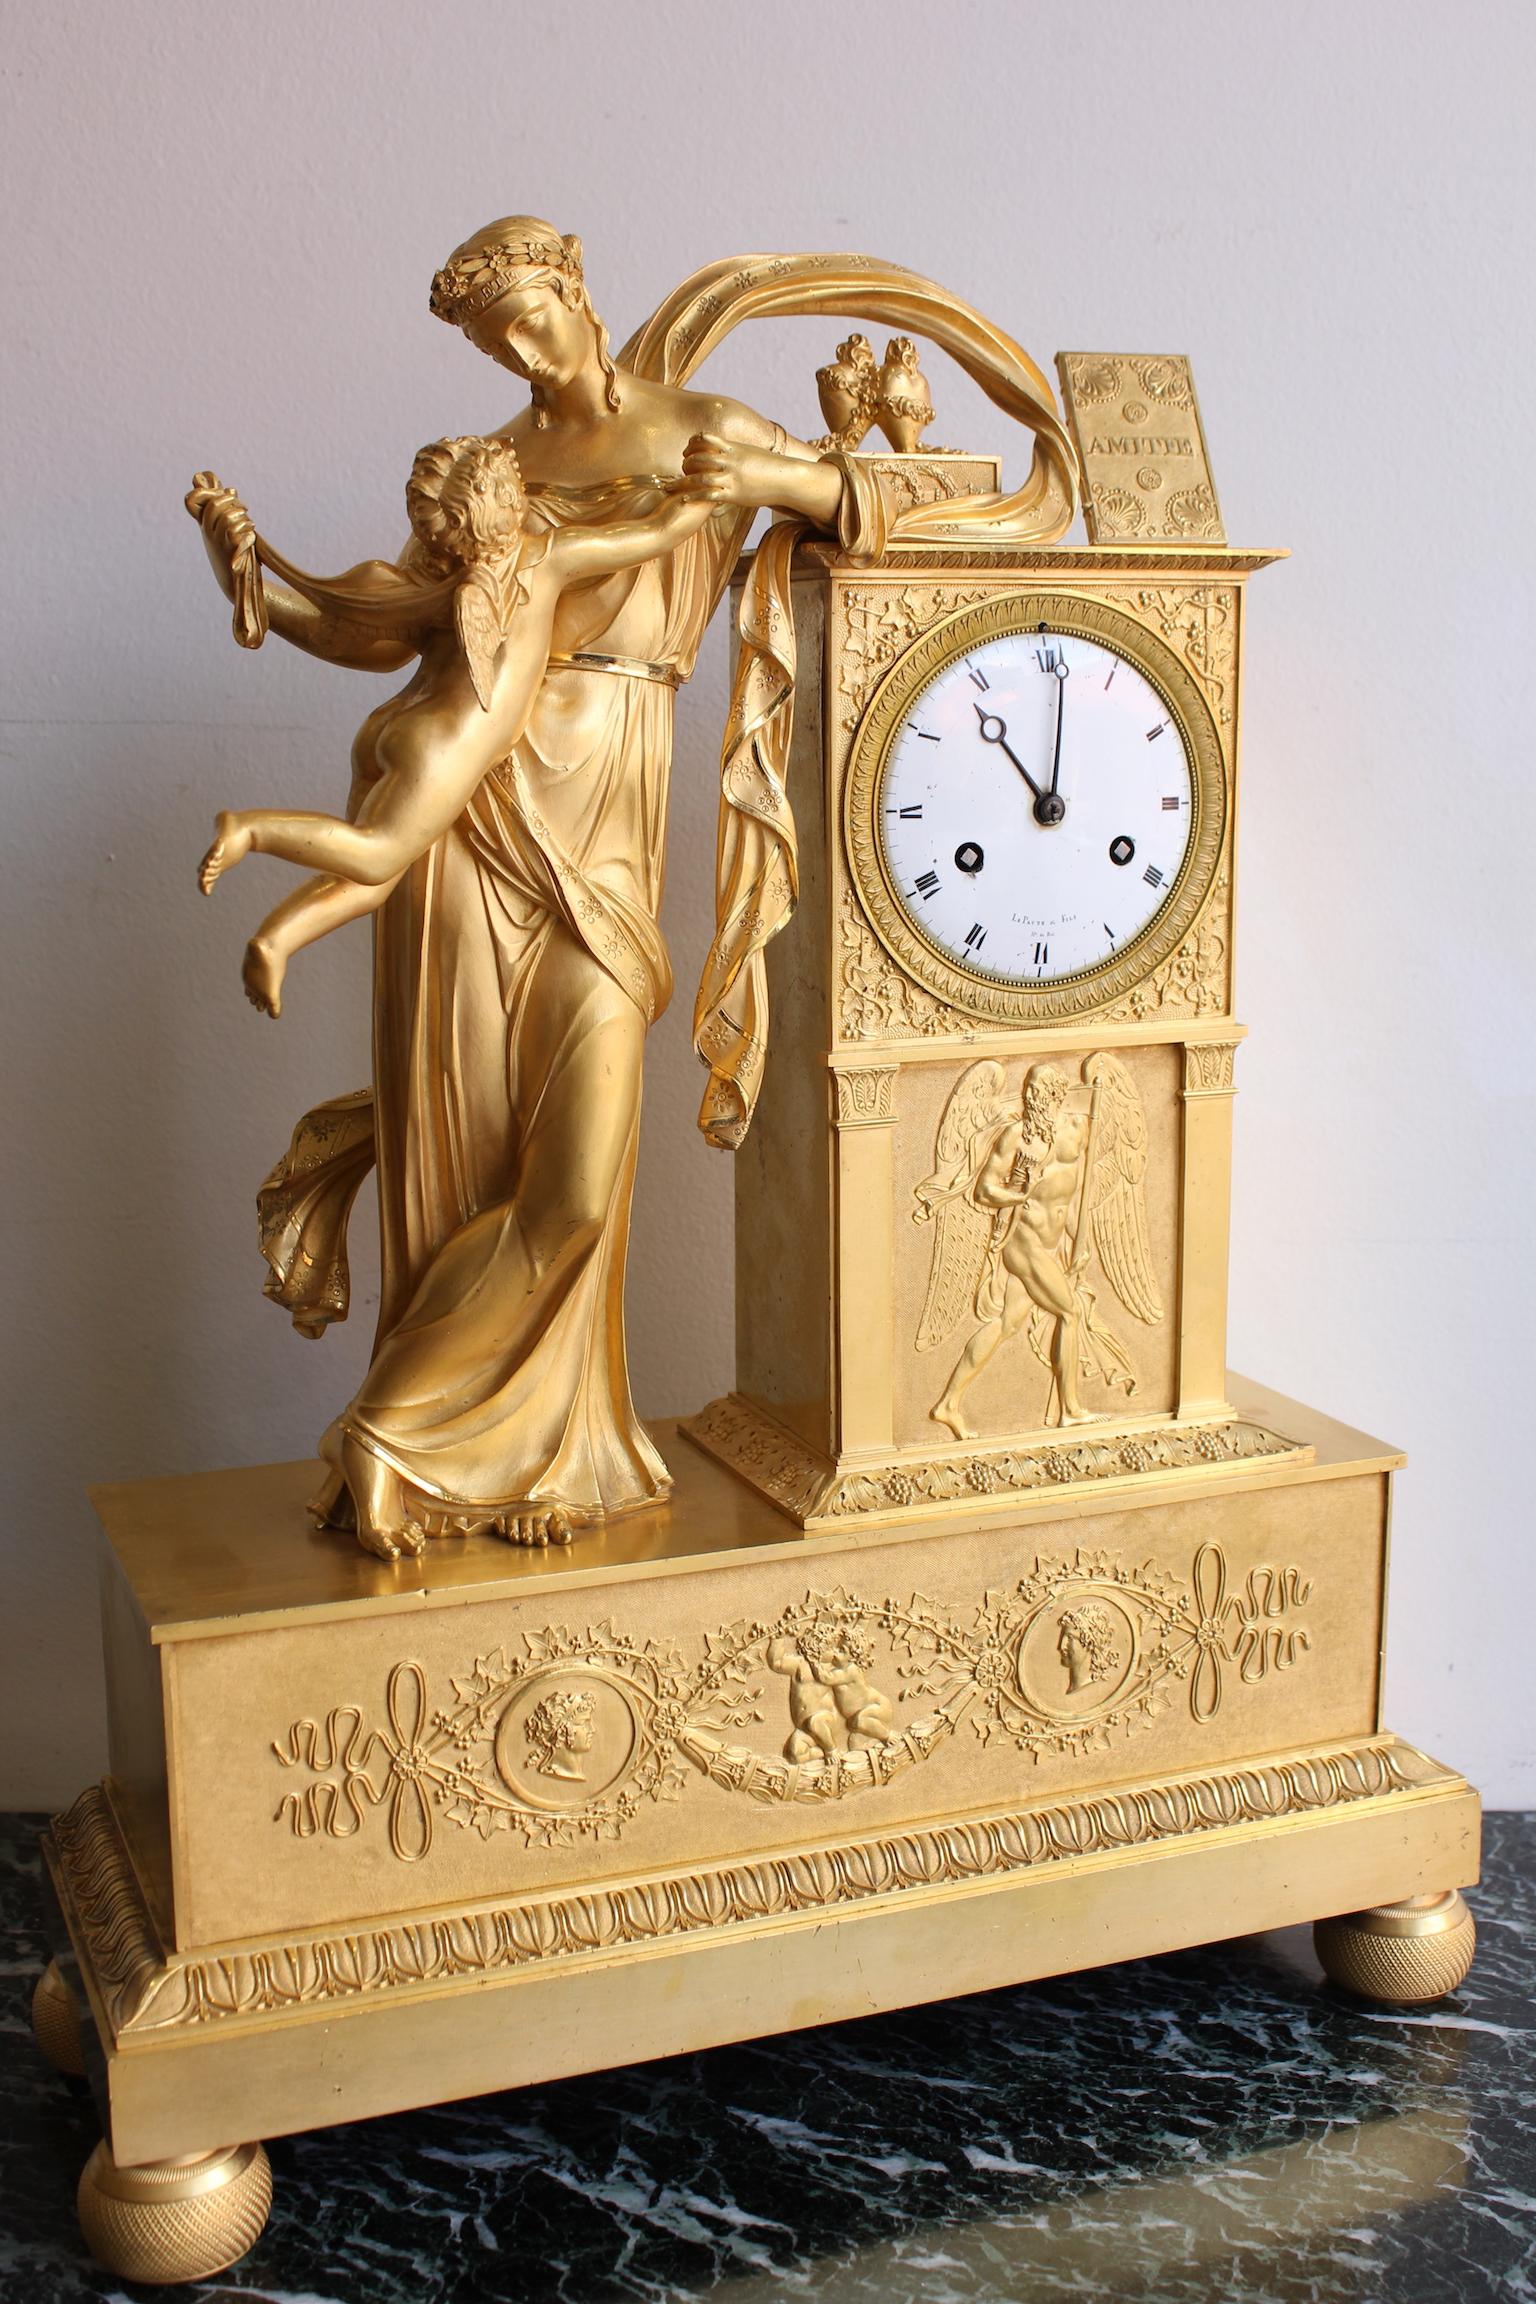 19th century Empire clock representing a woman with a winged love.
Lepaute movement in perfect condition.
Wire movement with its pendulum.
Original gilding.
Dimensions: L 36cm, H 46cm, D 13cm.